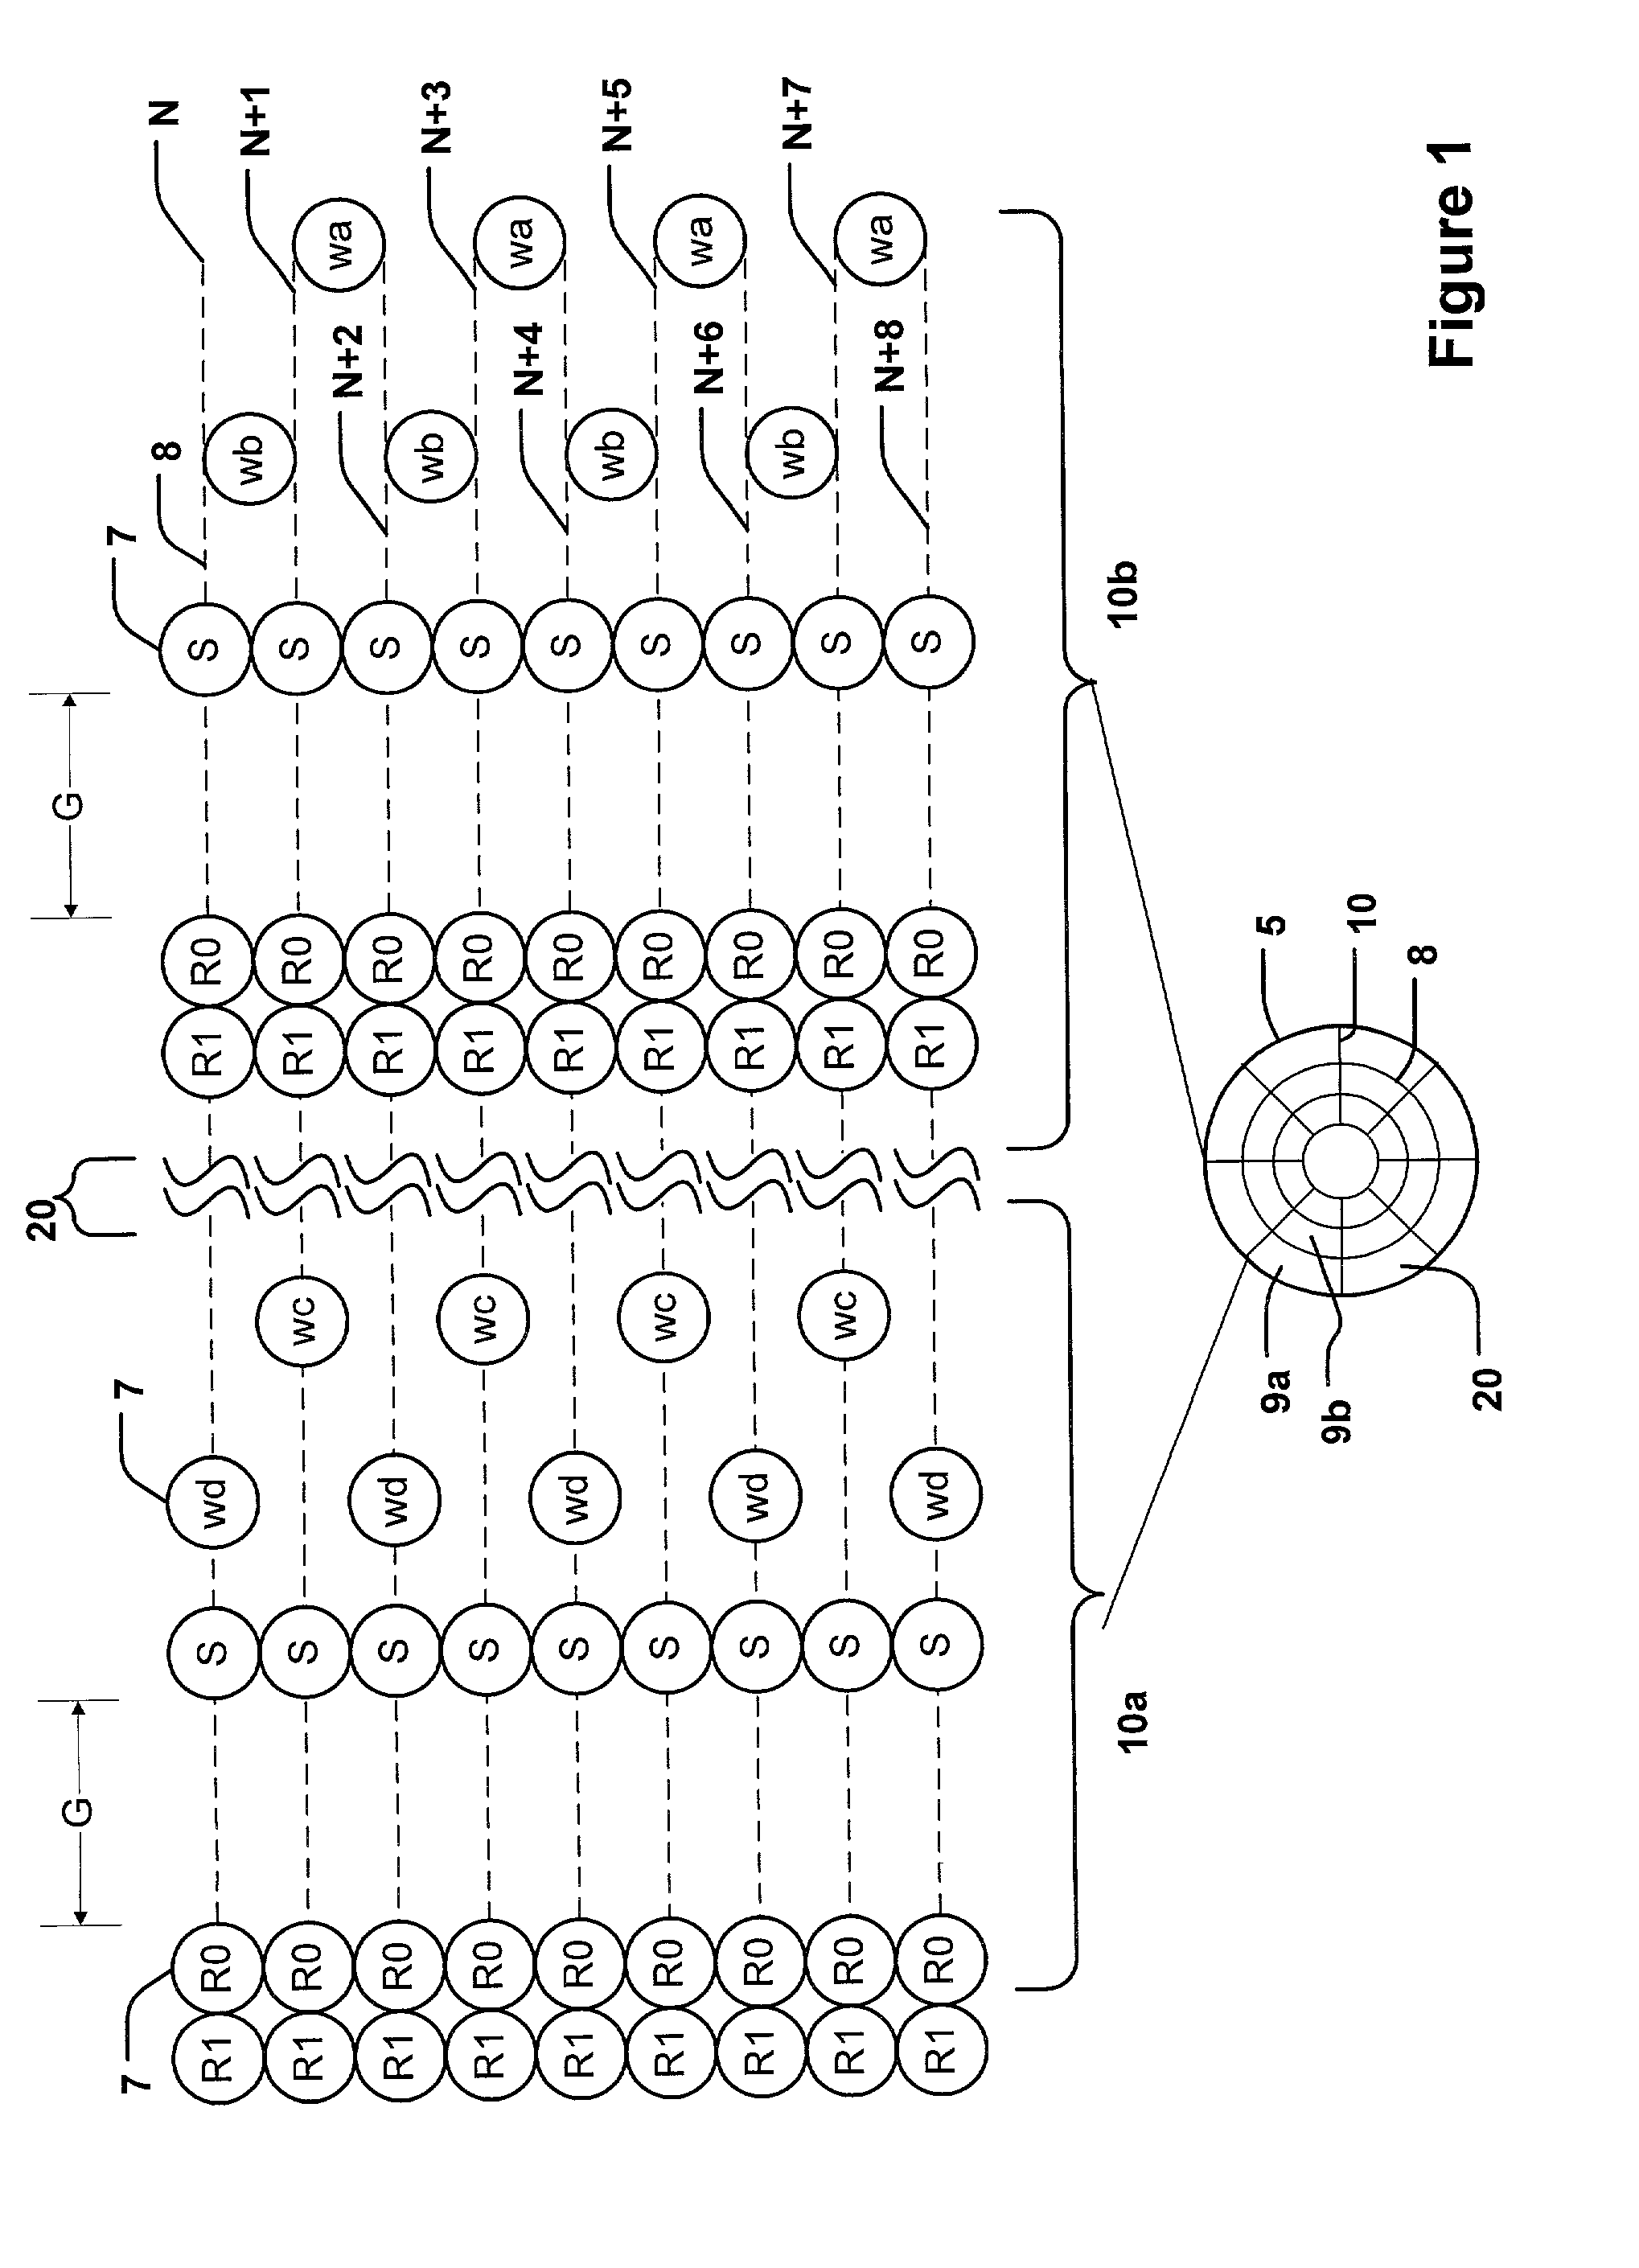 System and method for a high bandwidth servo system